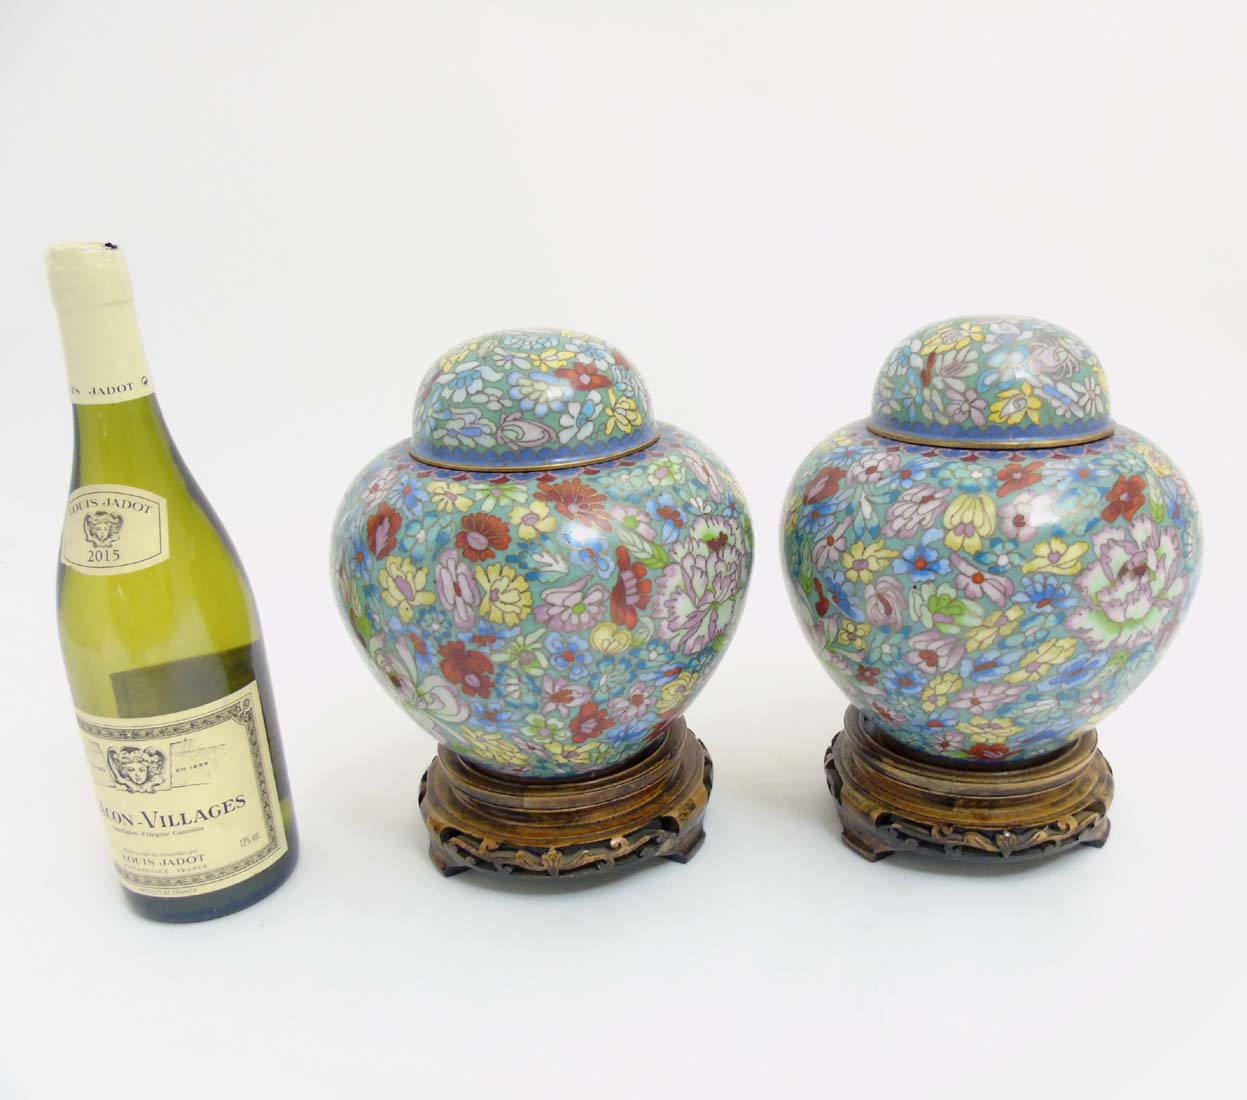 A pair of cloisonne gilt brass Ginger jars on stands with floral decoration.